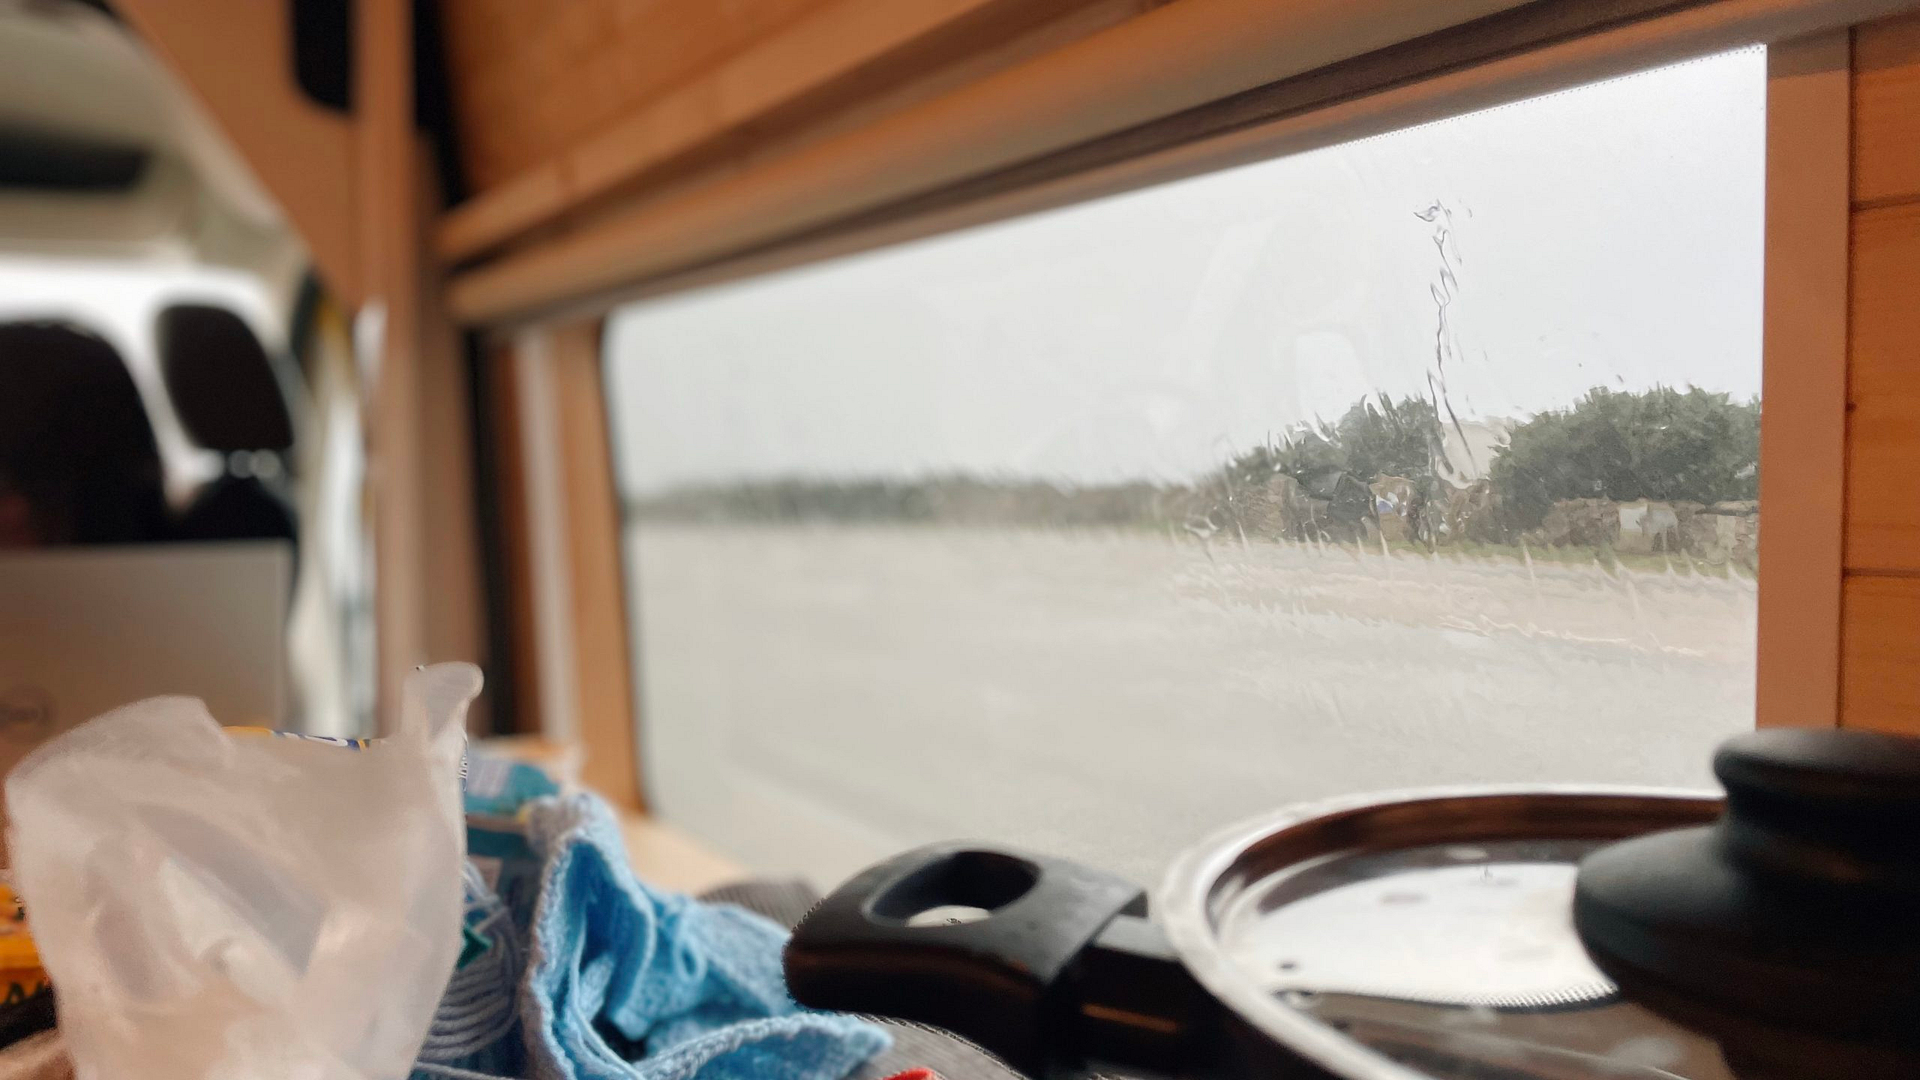 Sitting inside a camper with bad weather